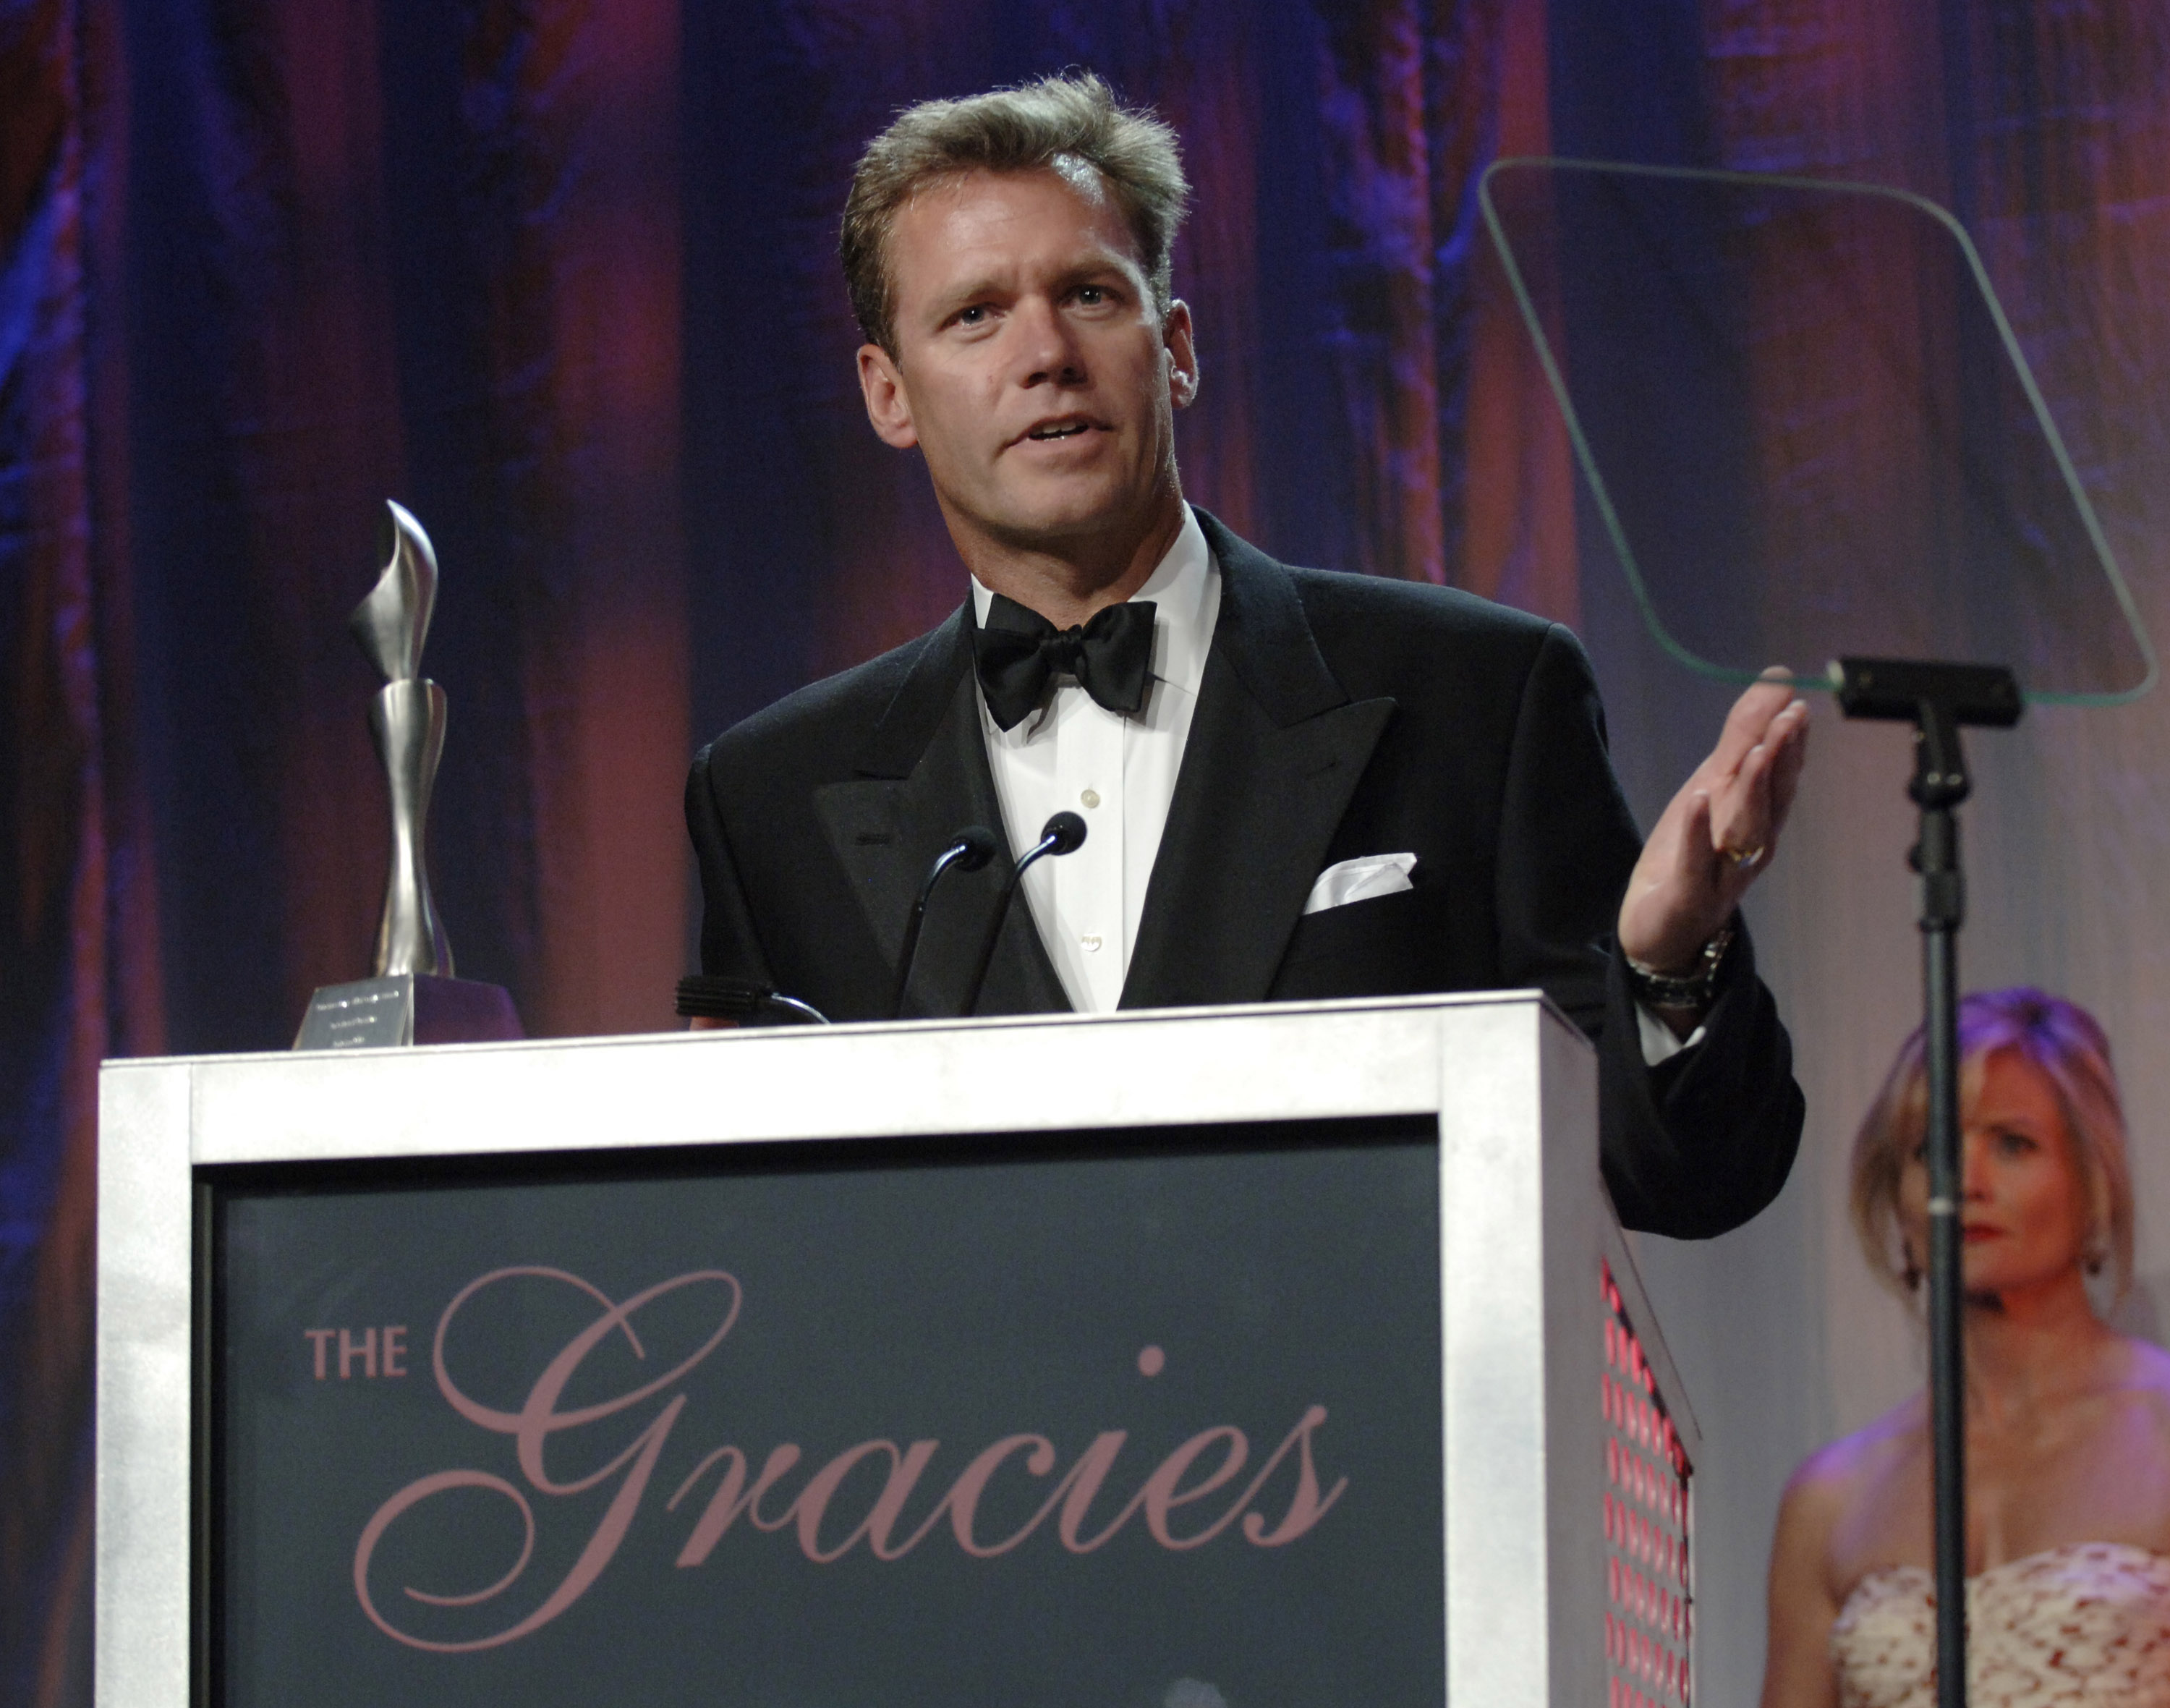 Chris Hansen, accepting award for Outstanding Documentary on June 19, 2006 at the Gracie Allen awards. (Larry Busacca—Getty Images)